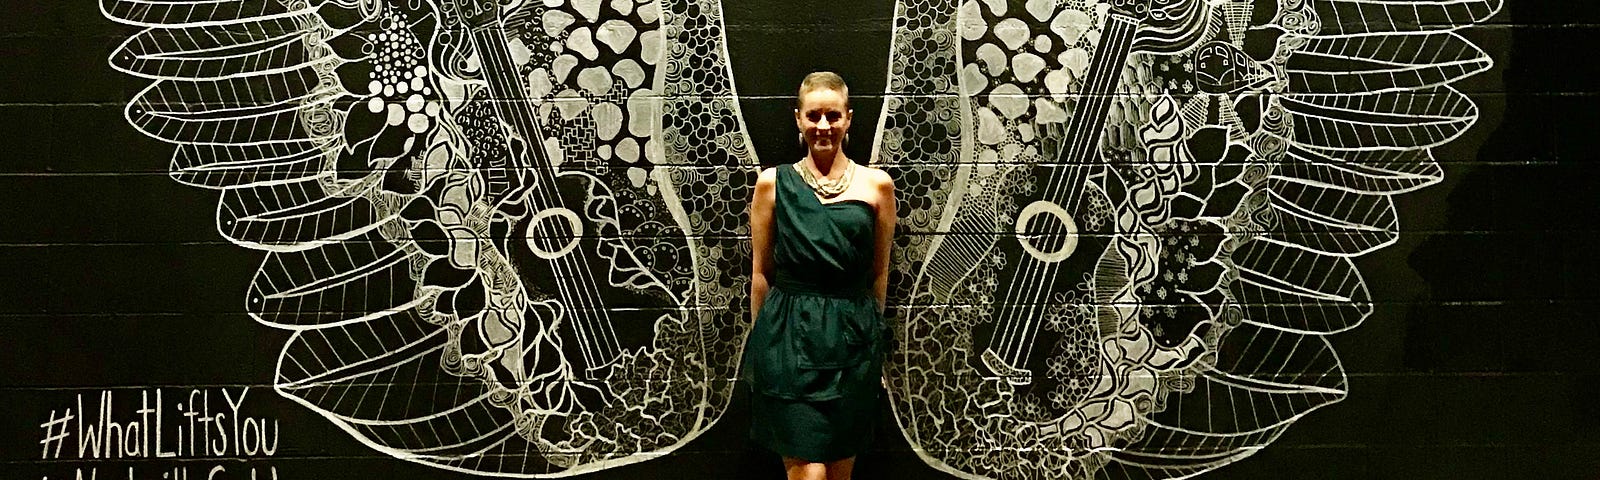 A photo of the author’s wife in front of a wall painting of wings.